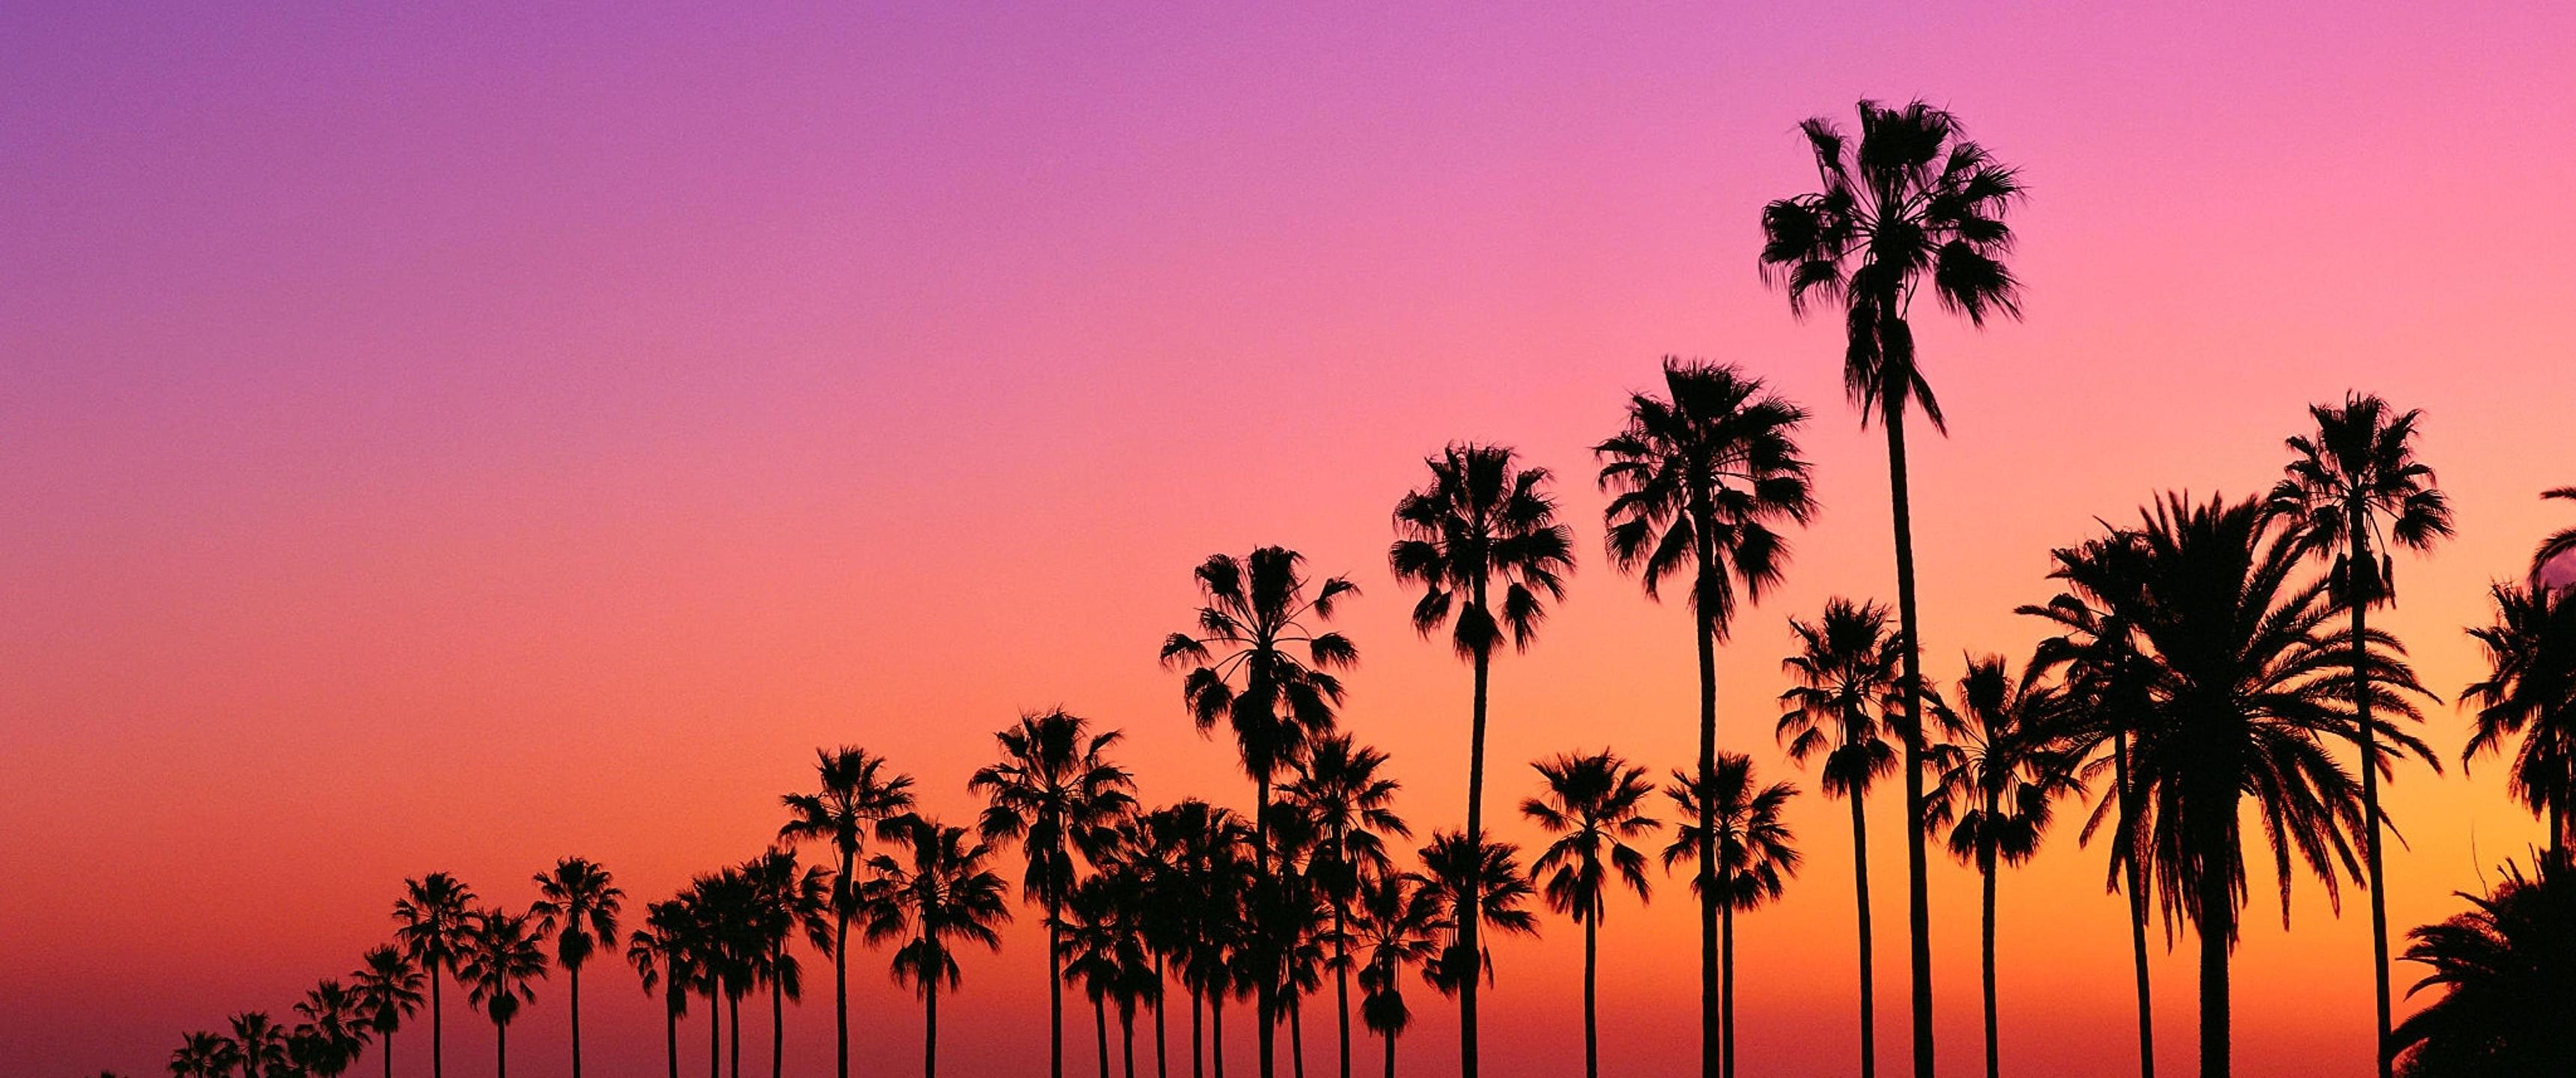 Los Angeles sunset with palm trees